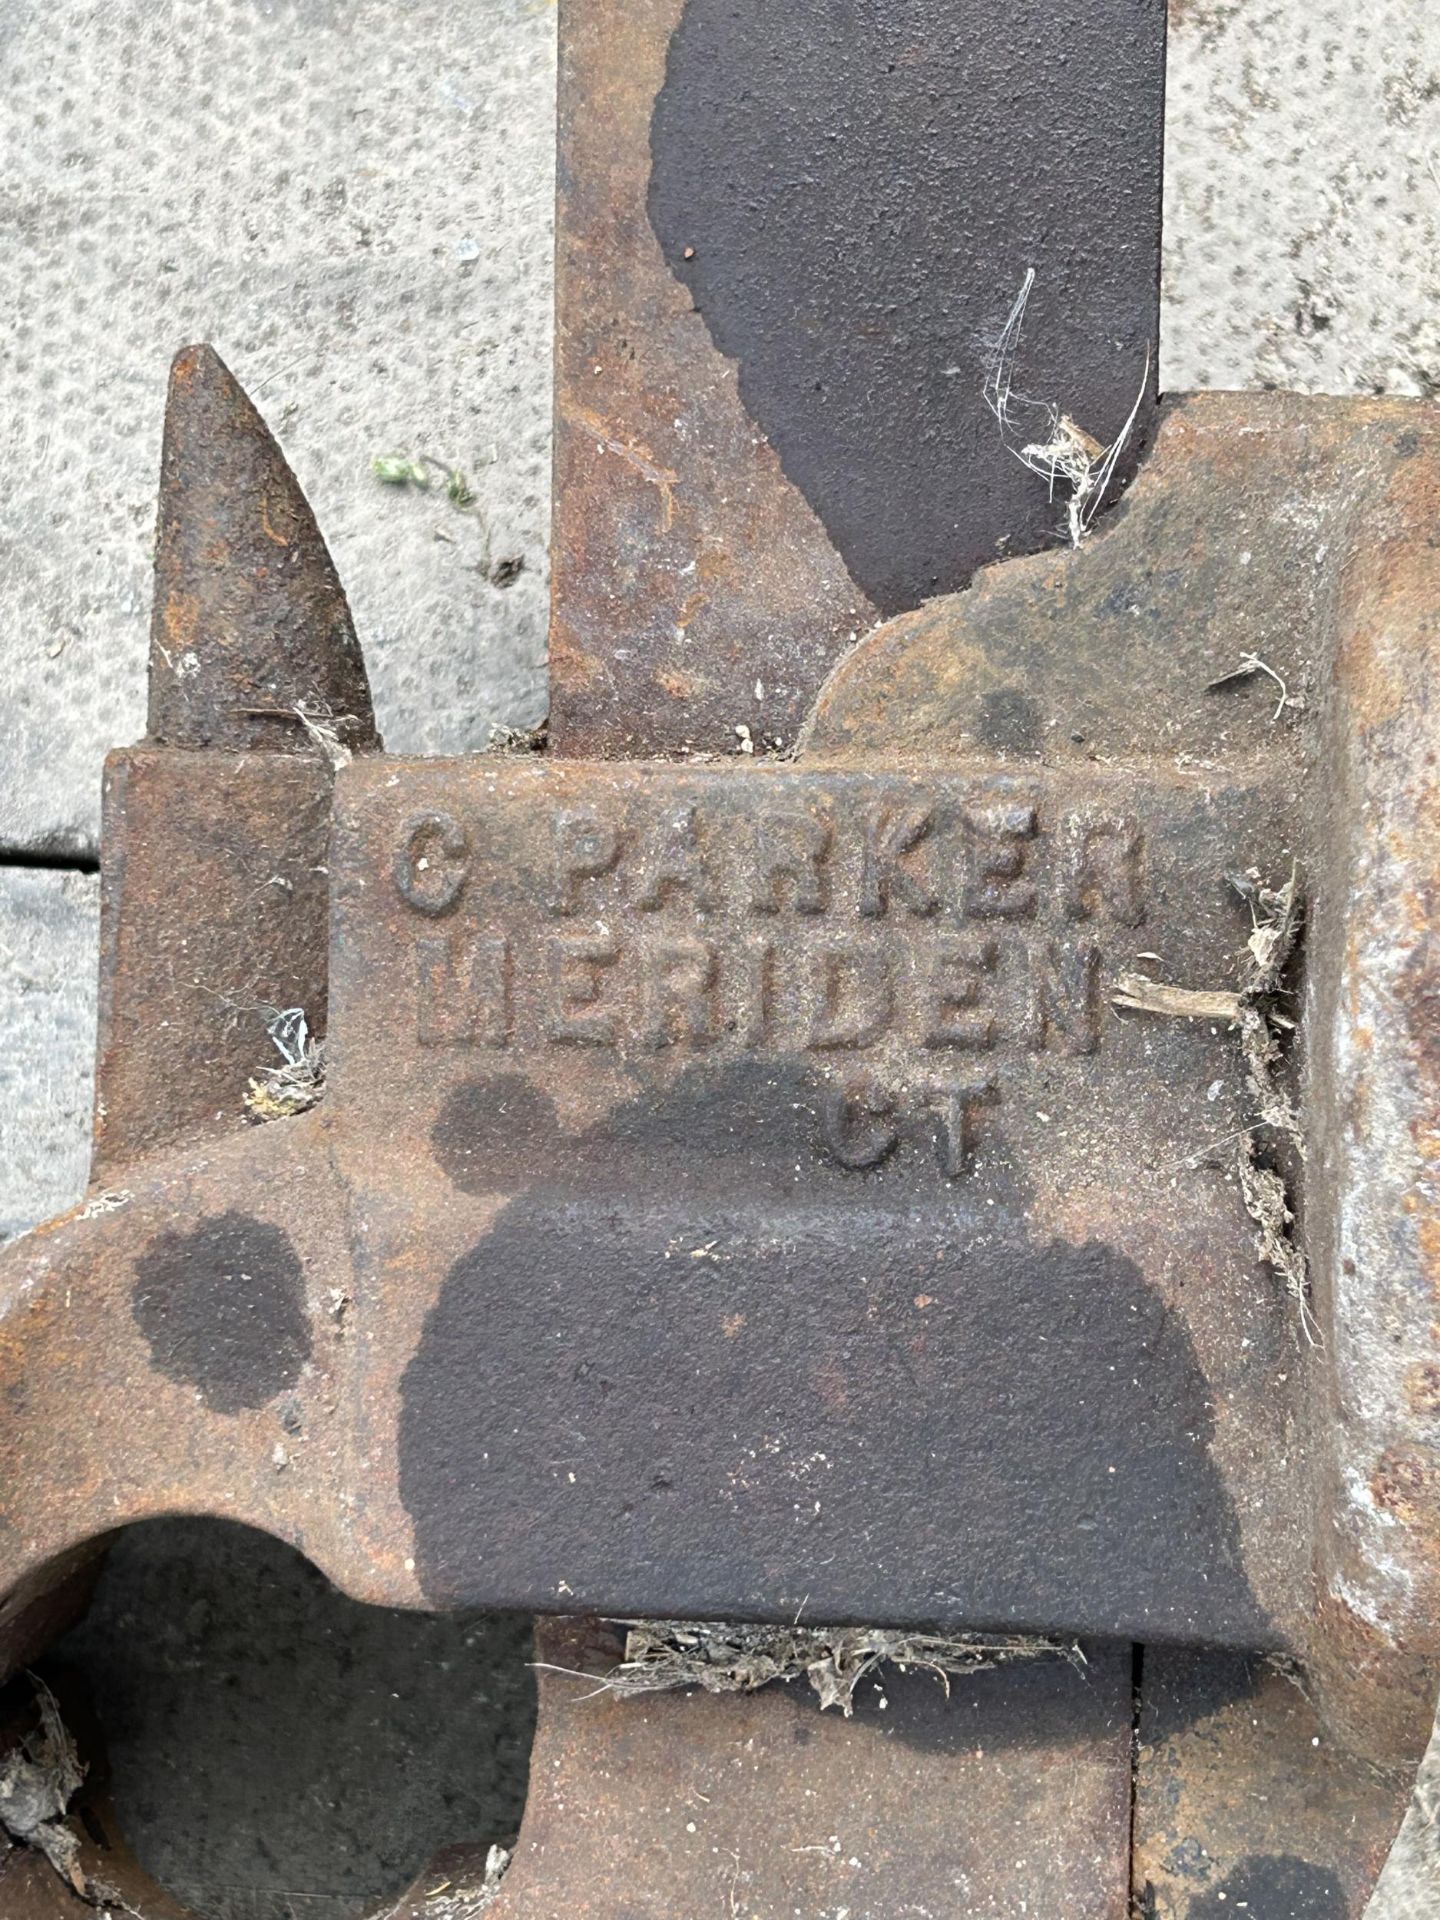 A VINTAGE C. PARKER MERIDENT VICE WITH ANVIL DETAIL - Image 3 of 4